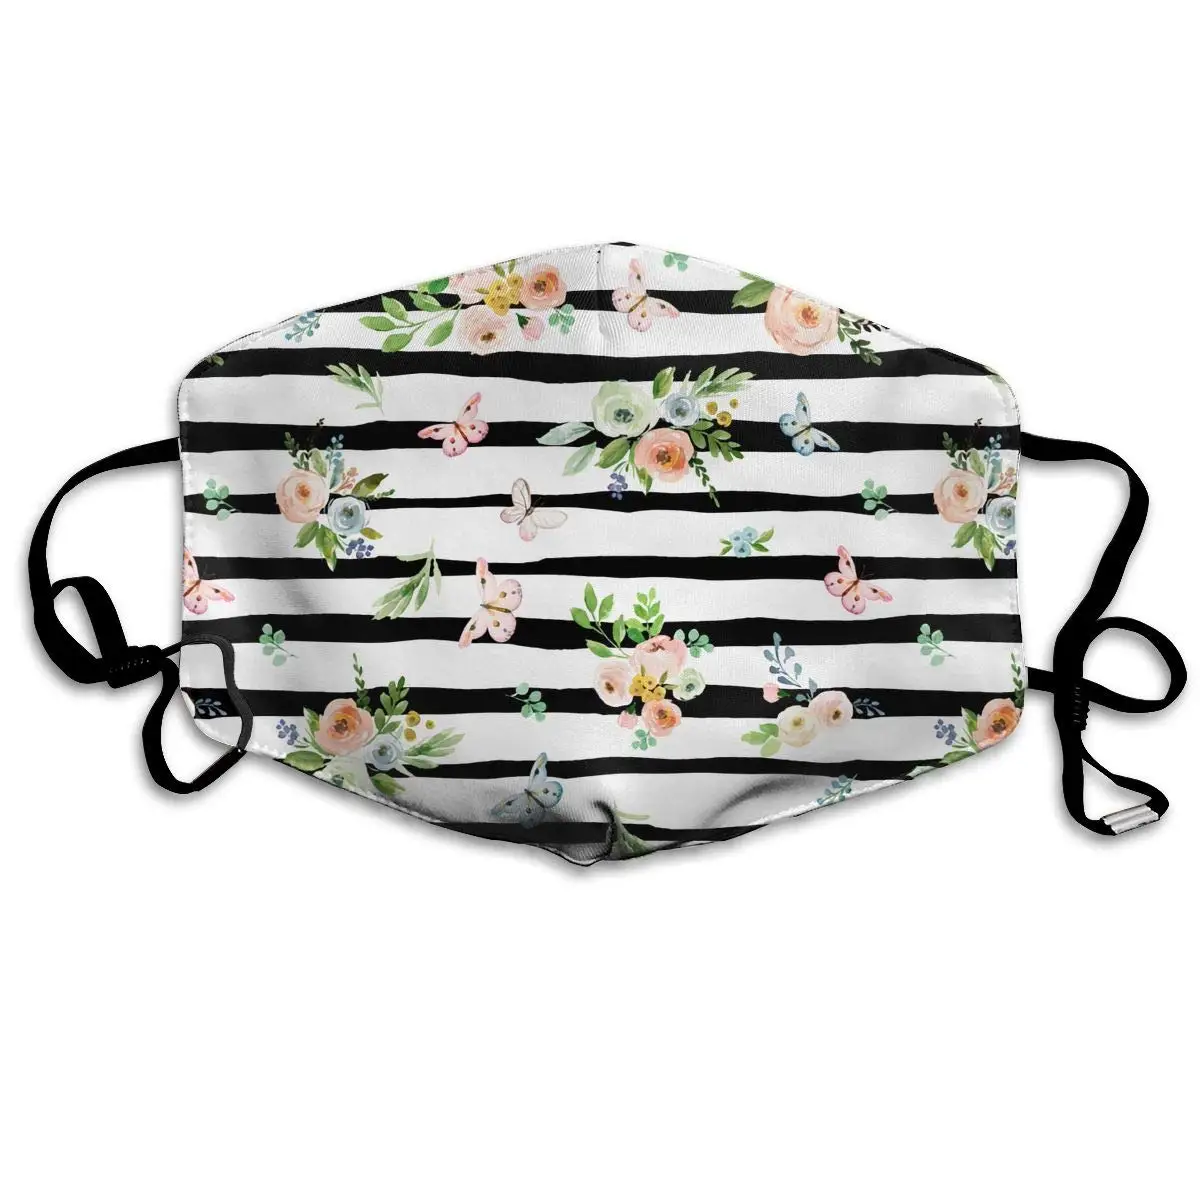 

Spring Time Bunny Florals Black White Stripes Washable Reusable Mask, Cotton Anti Dust Half Face Mouth Mask For Kids Teens Men